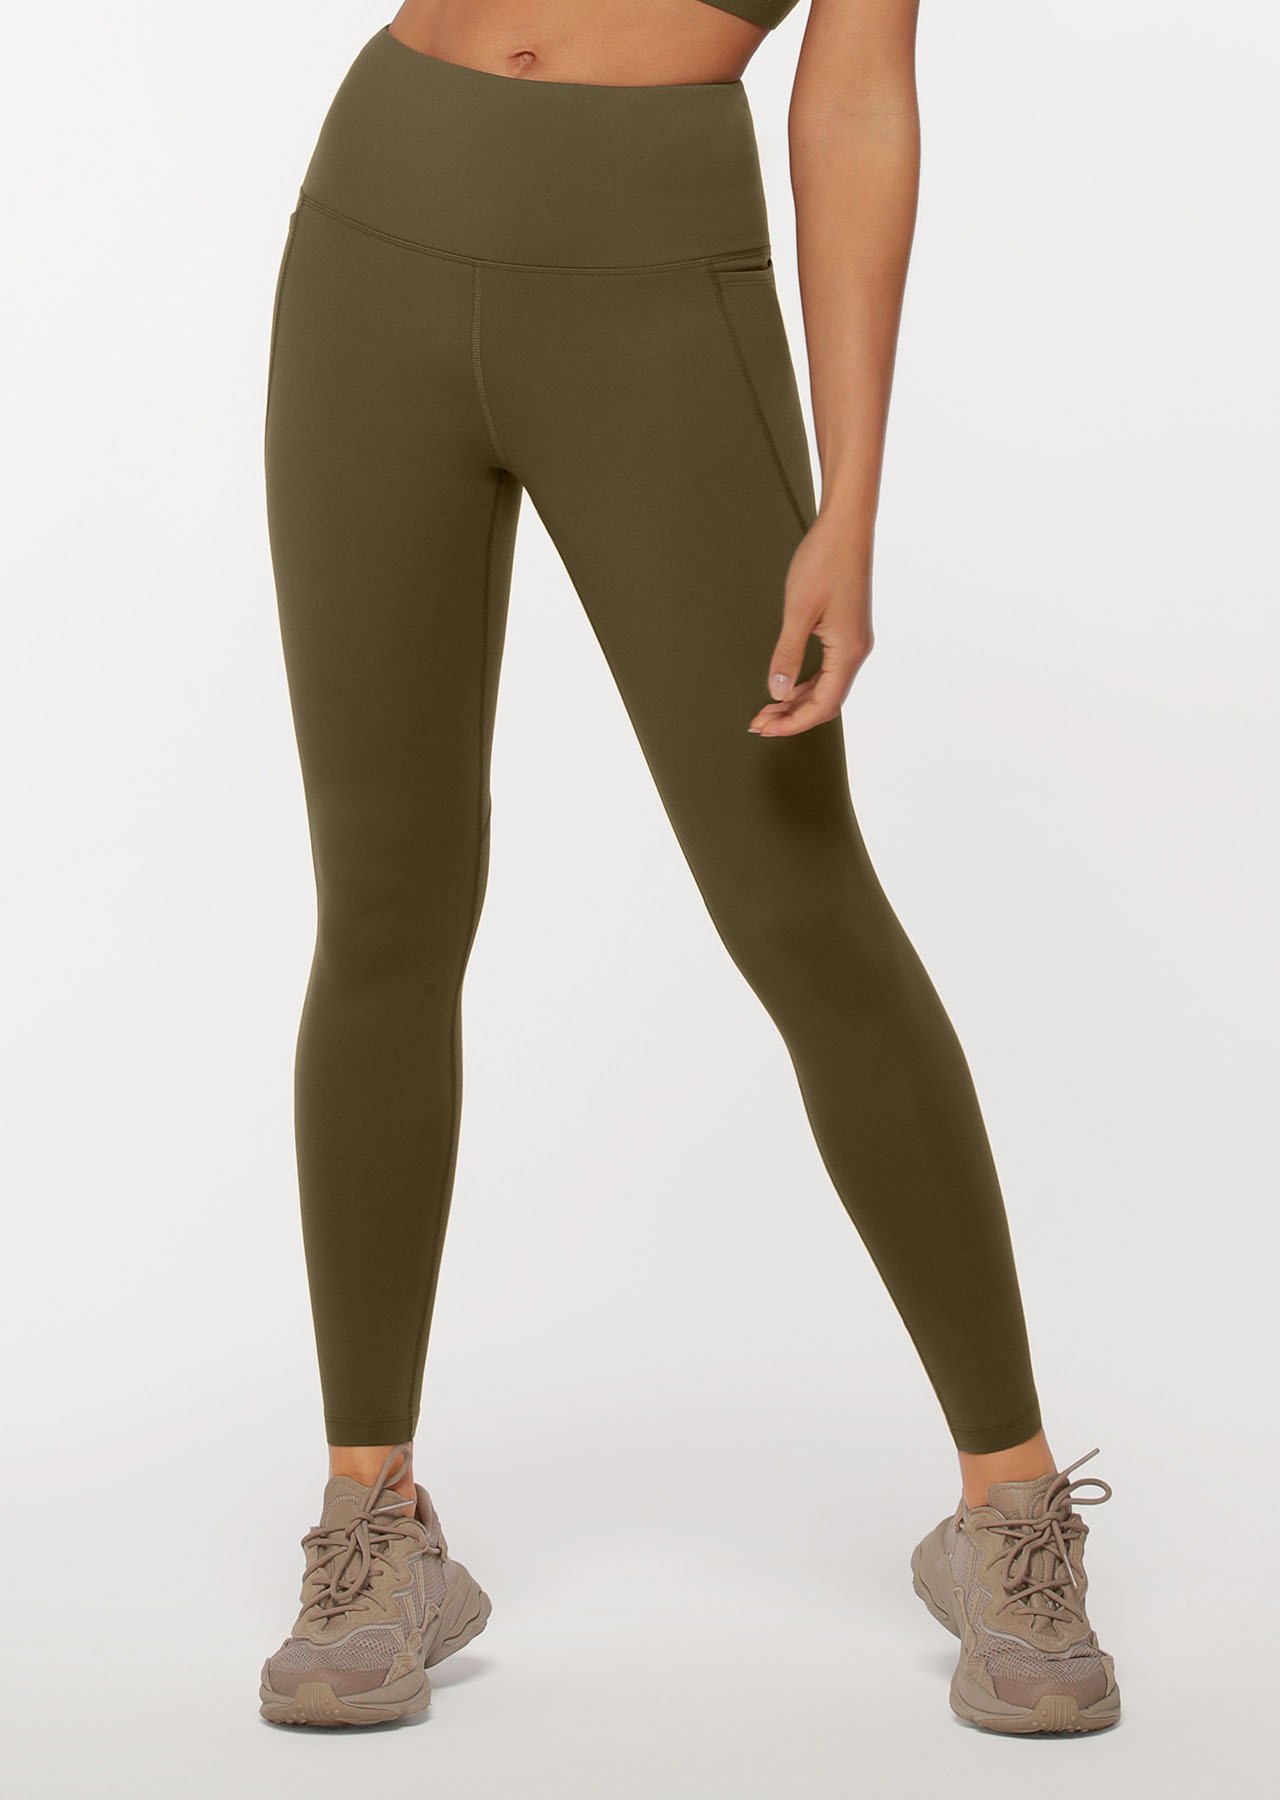 Lorna Jane Thermal Leggings Nzxt  International Society of Precision  Agriculture